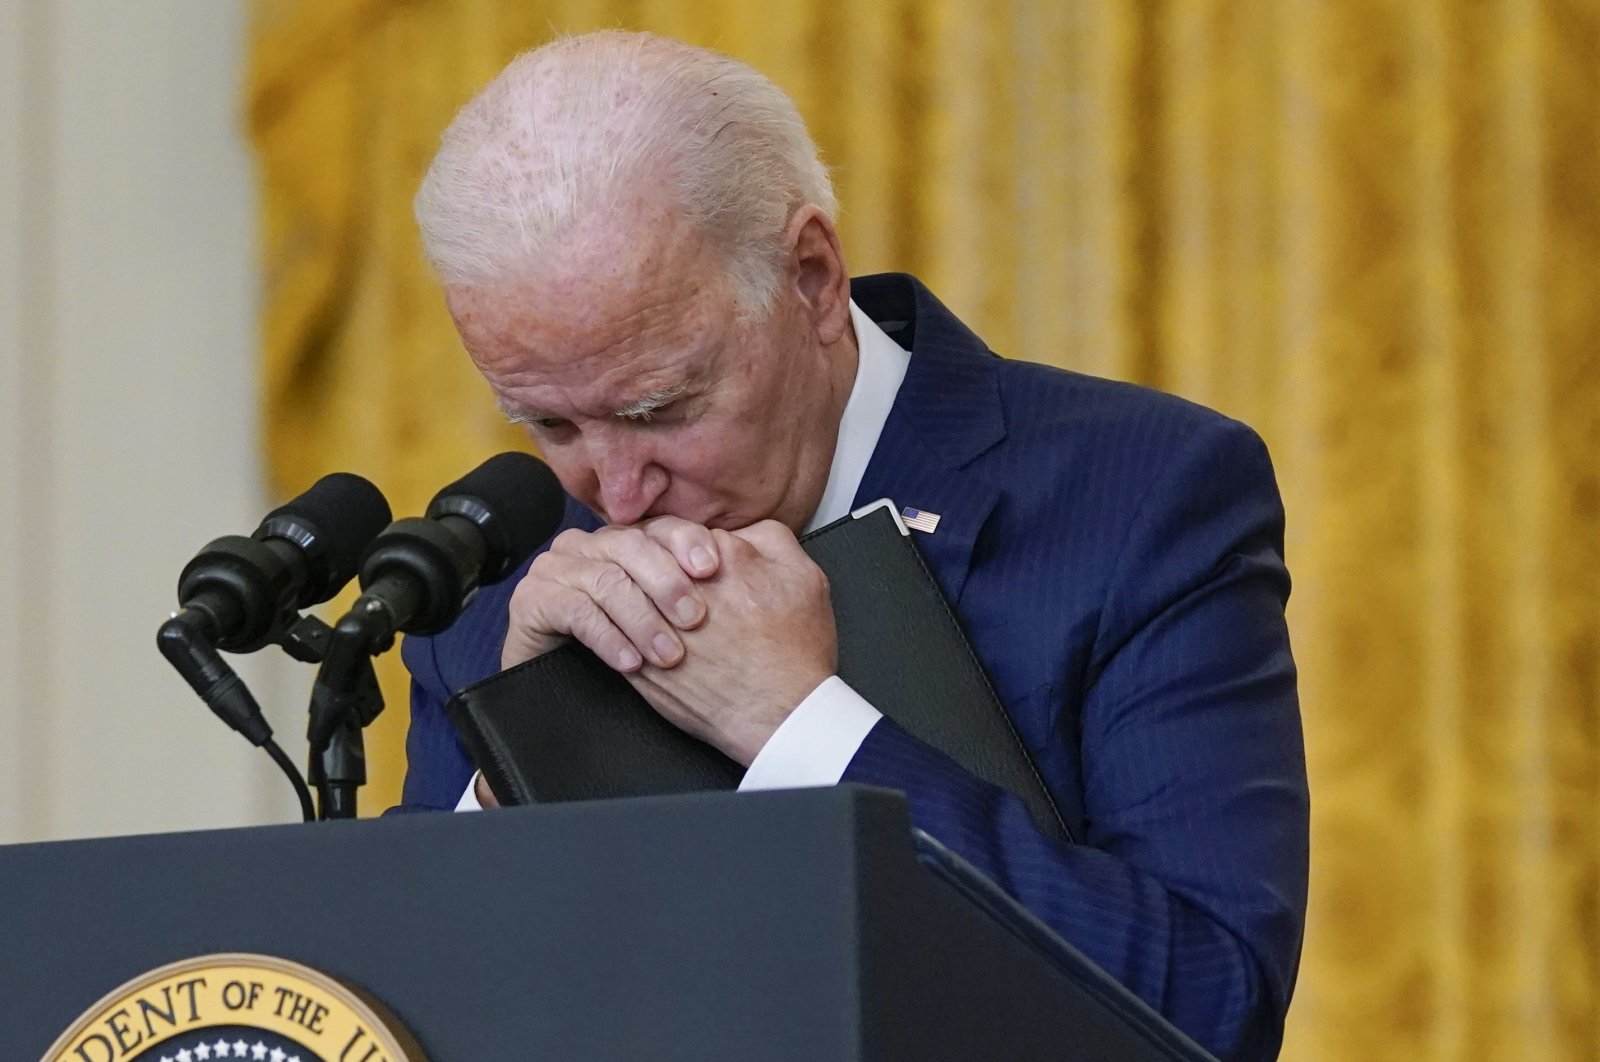 President Joe Biden pauses as he listens to a question about the bombings at Kabul Hamid Karzai International Airport that killed at least 12 U.S. service members, from the East Room of the White House, in Washington, D.C., U.S., Aug. 26, 2021.(AP Photo)